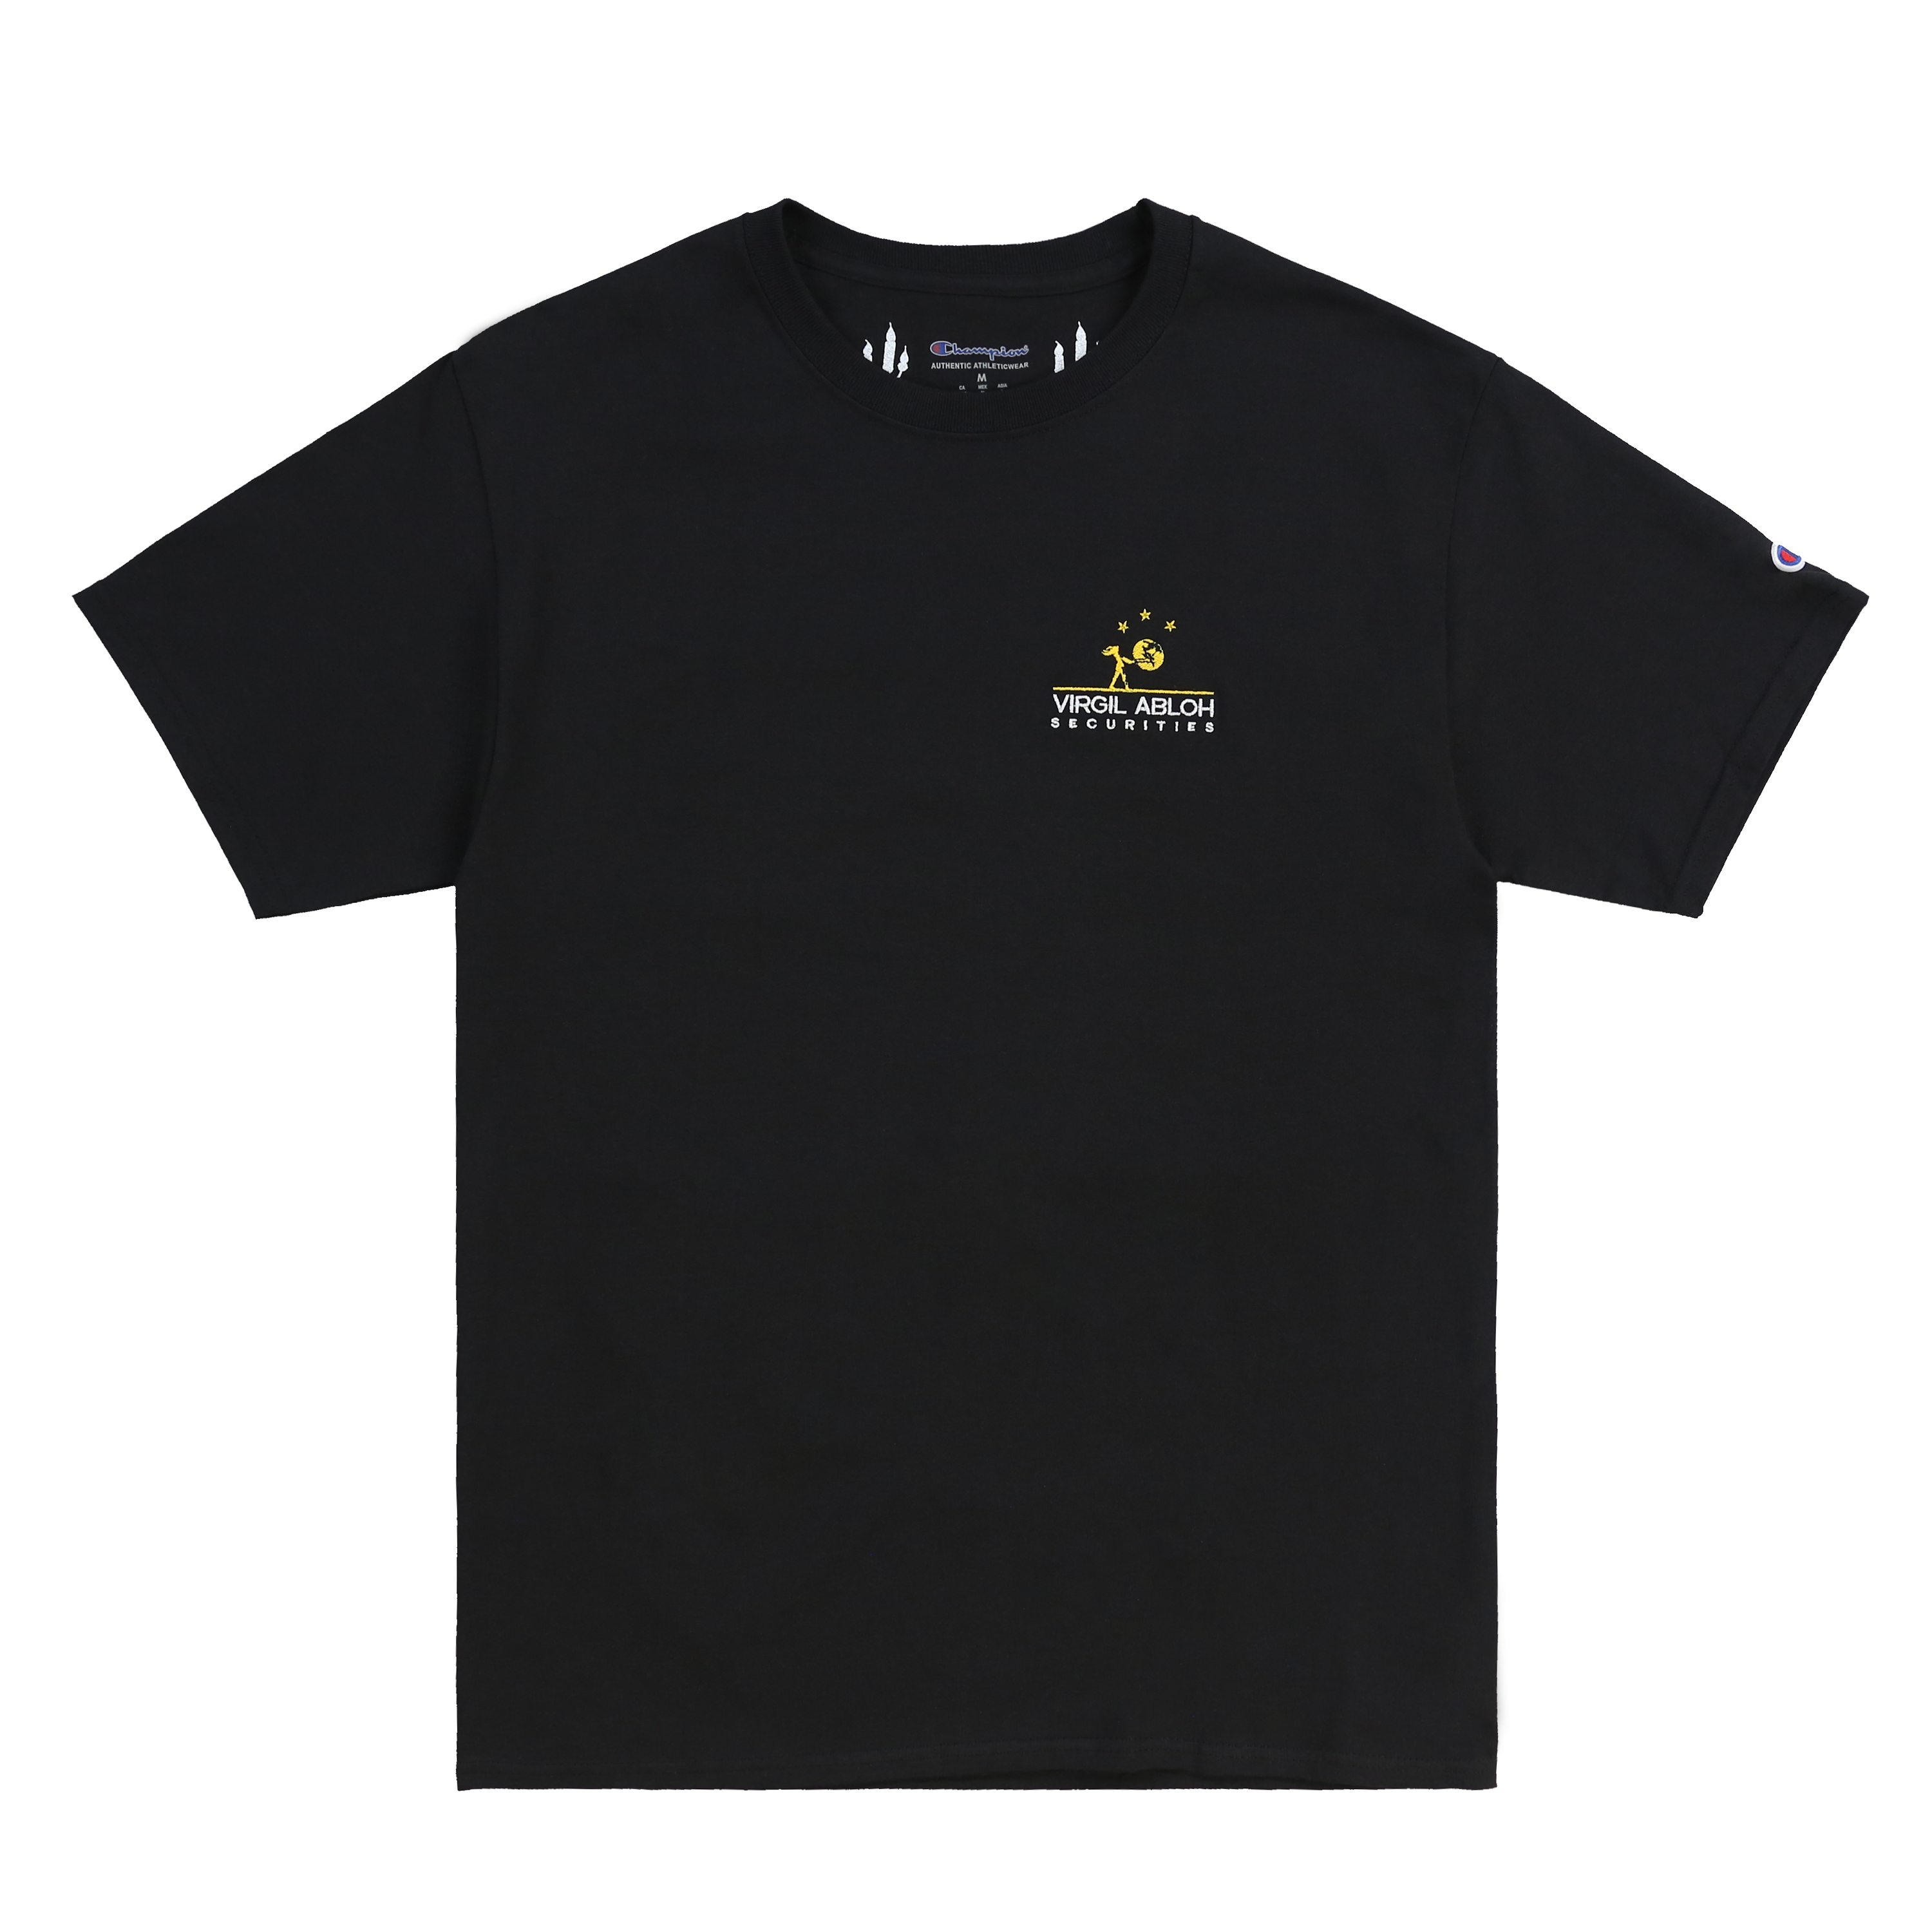 Virgil Abloh Securities Concept T-Shirt – Canary Yellow